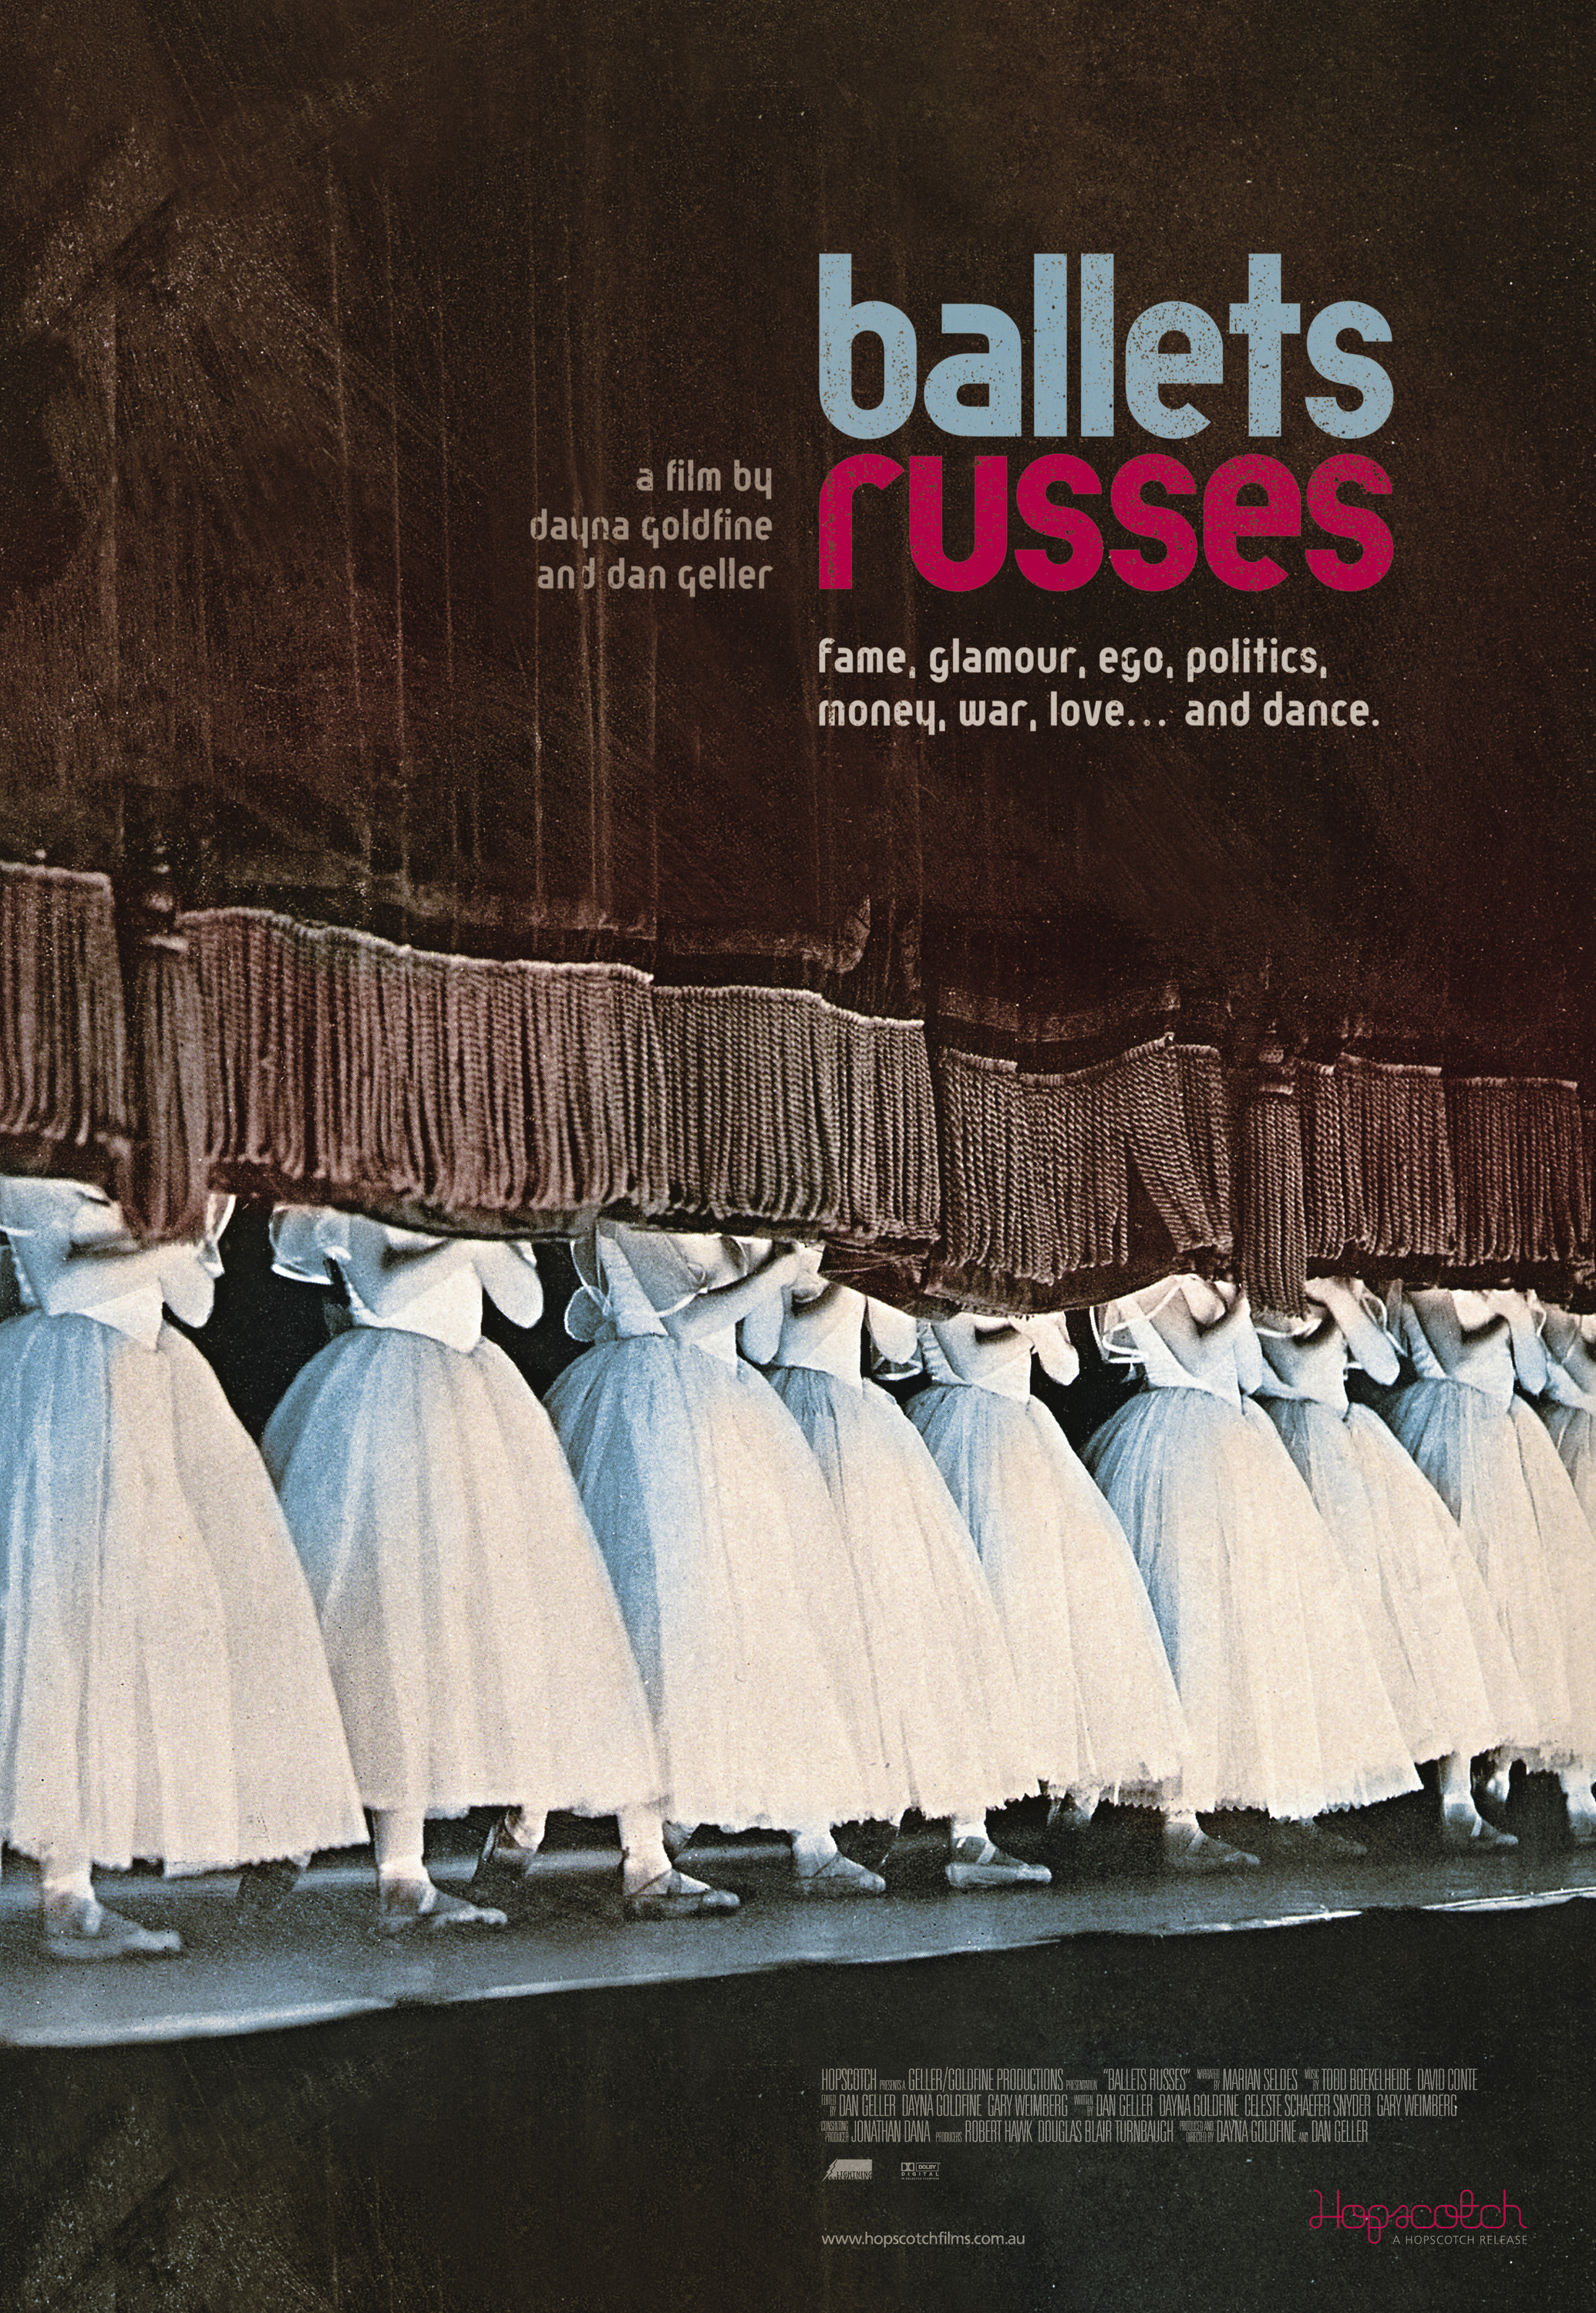 Mega Sized Movie Poster Image for Ballets russes (#2 of 2)